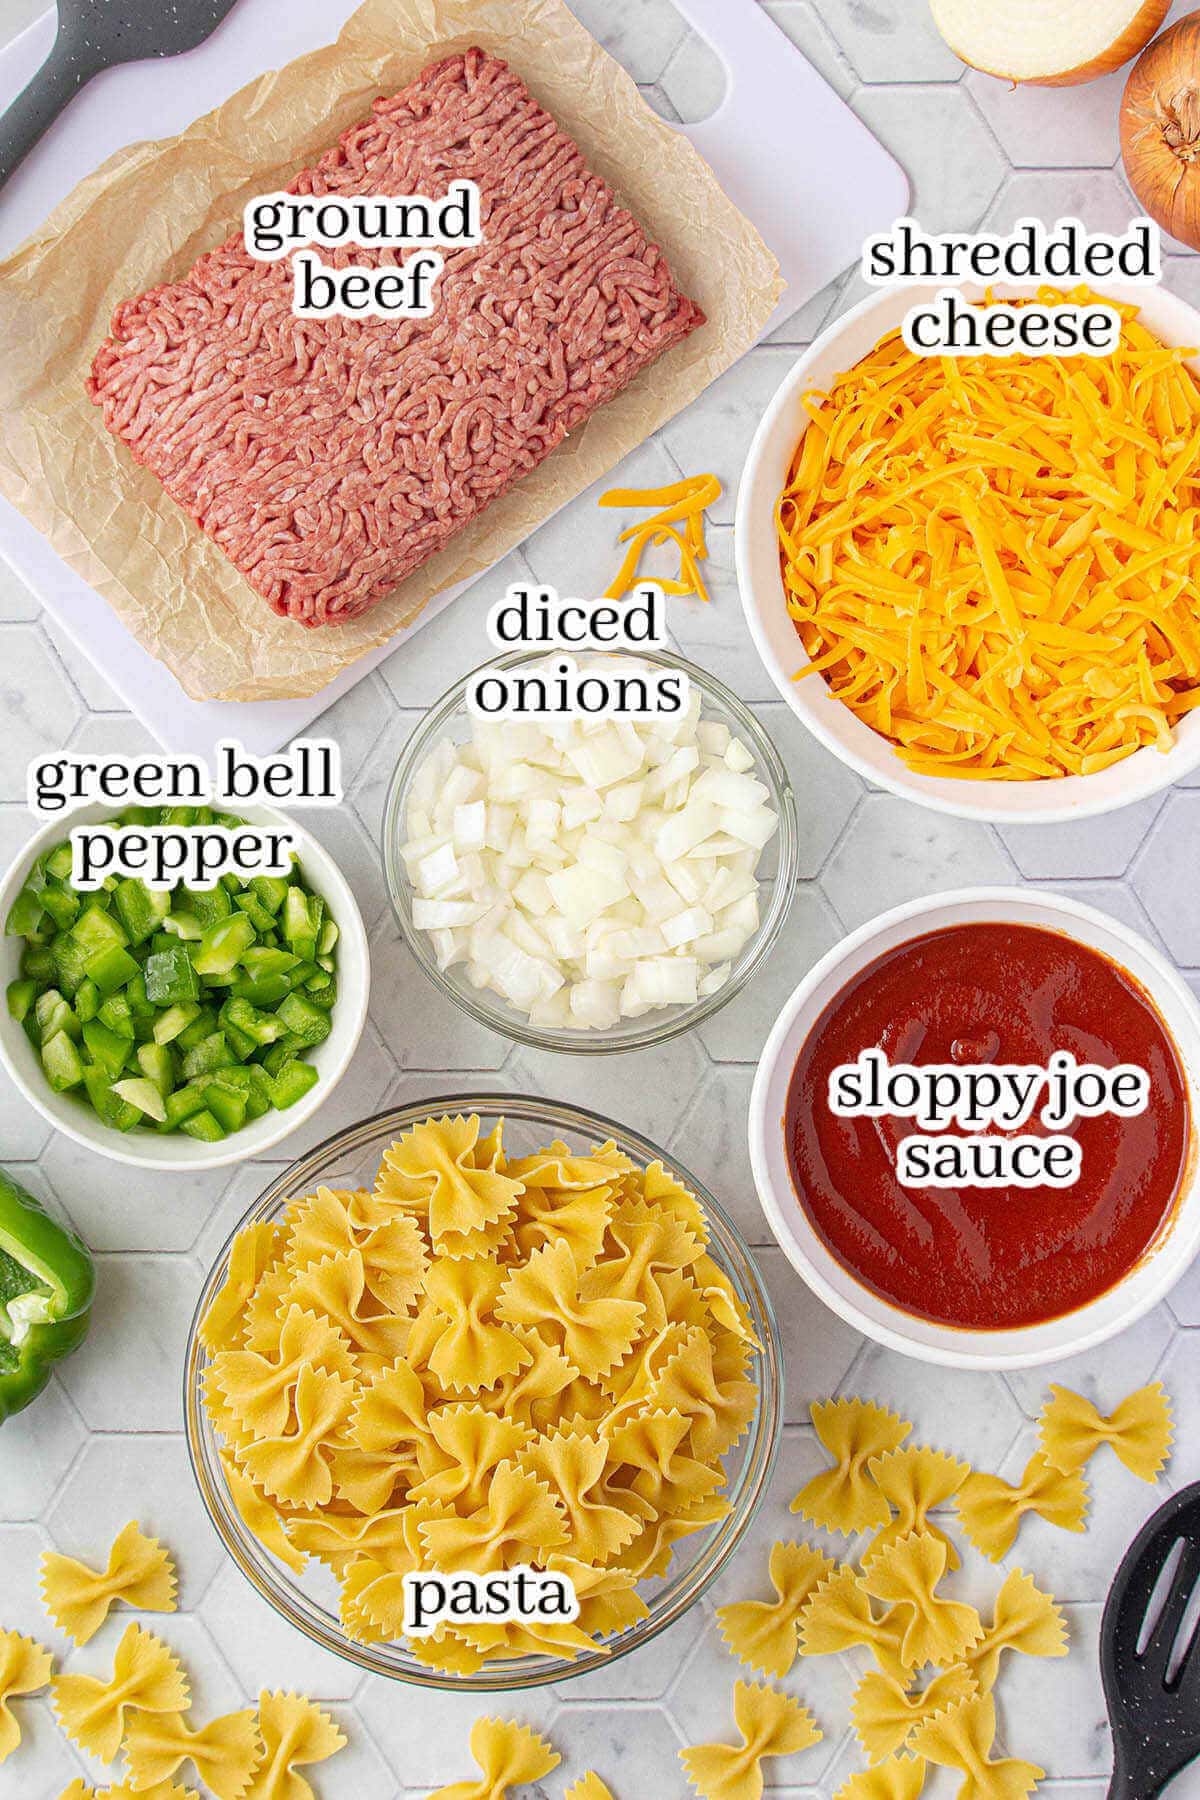 Ingredients to make casserole dish, with print overlay.